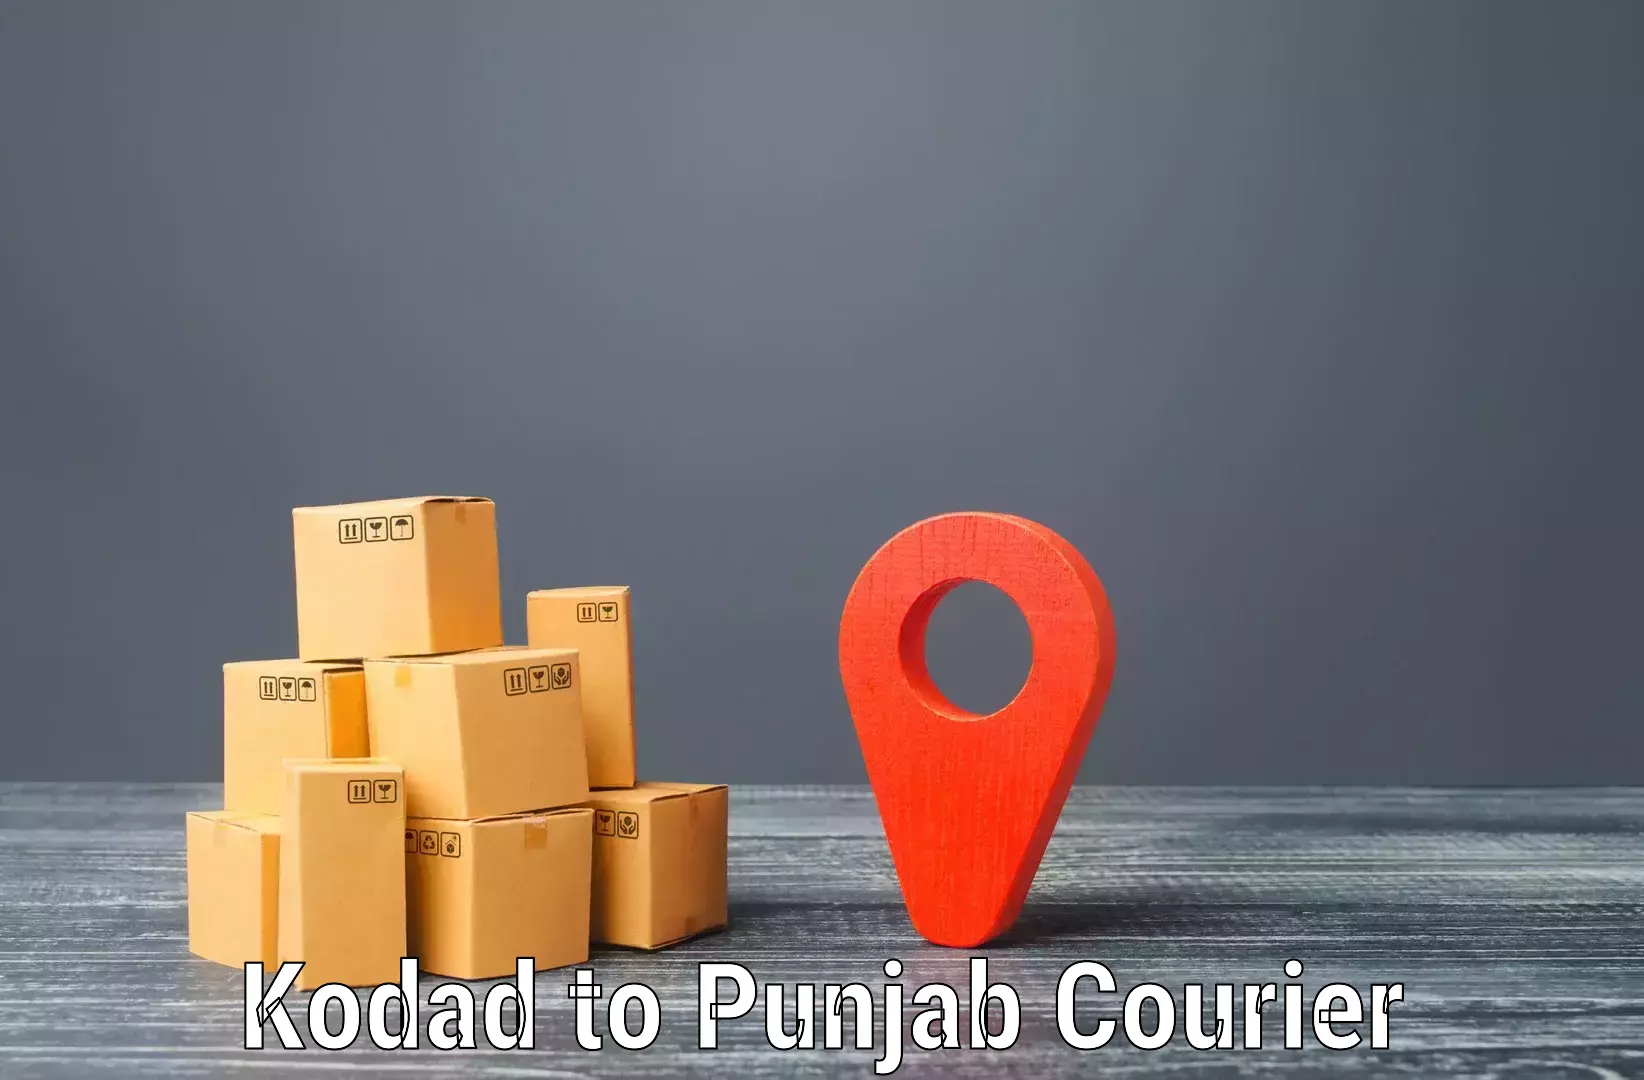 Commercial shipping rates in Kodad to Bathinda